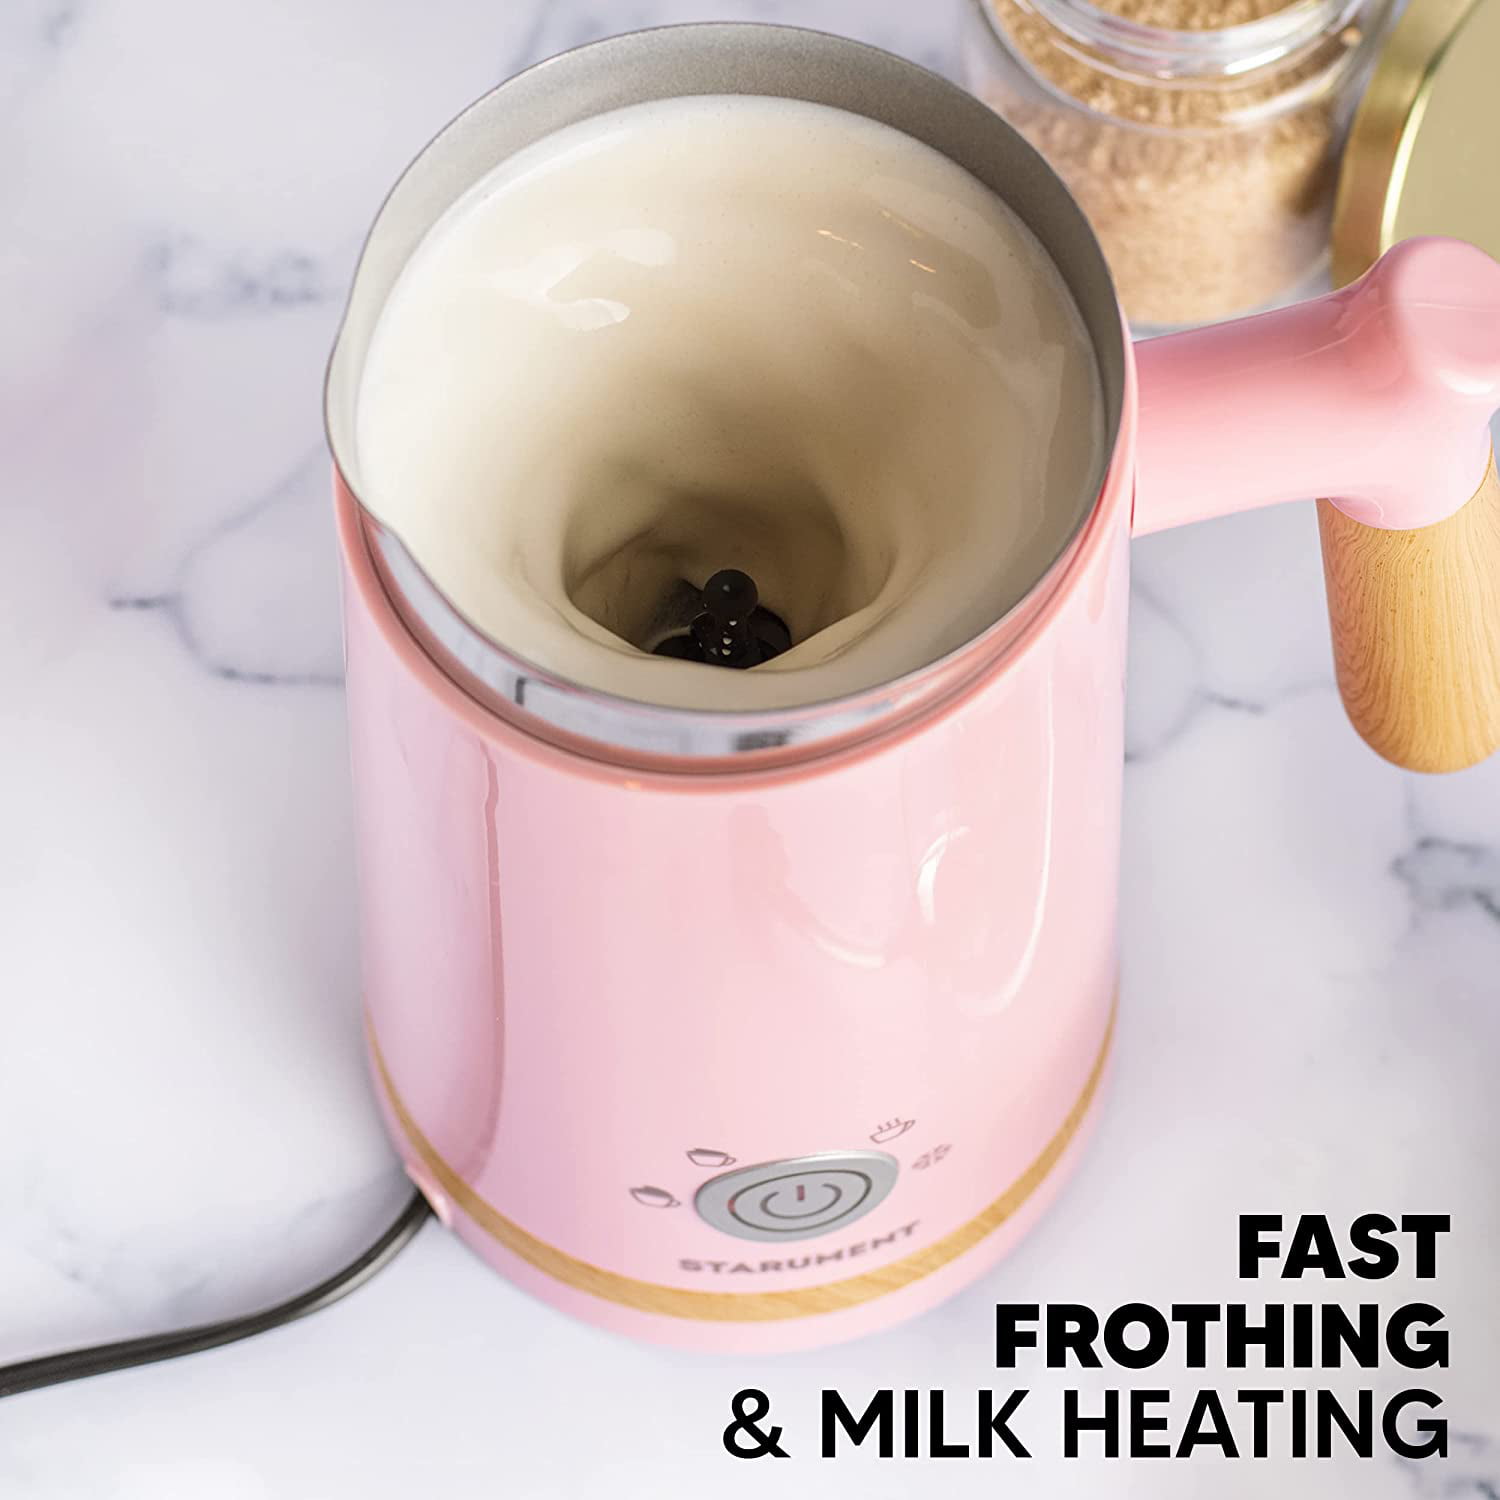 Starument Electric Milk Frother - Automatic Milk Foamer & Heater for  Coffee, Latte, Cappuccino, Other Creamy Drinks - 4 Settings for Cold Foam,  Airy Milk Foam, Dense Foam & Warm Milk - Easy to Use 